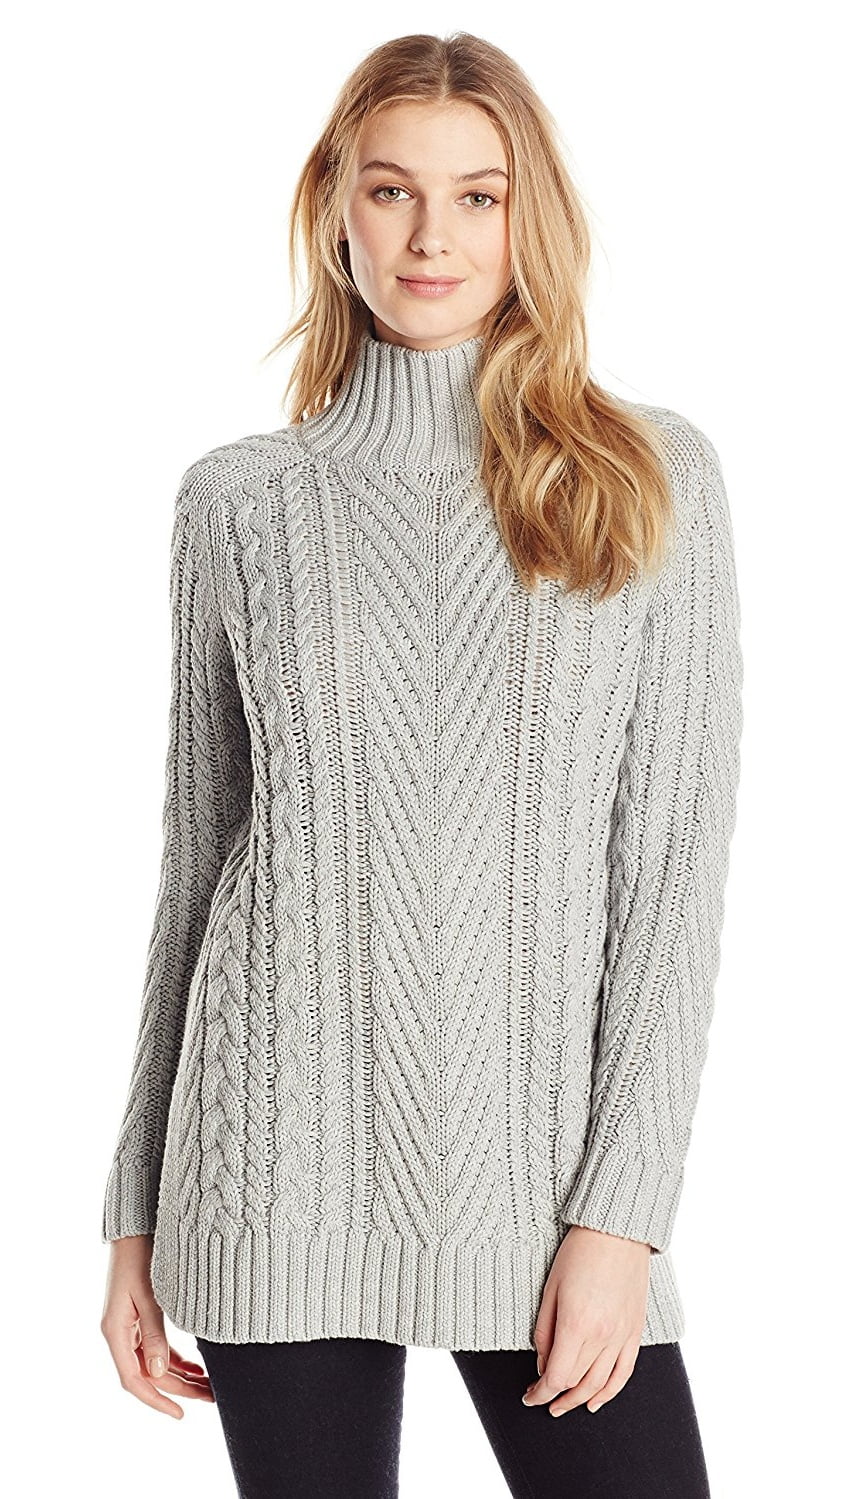 Vince Camuto - Vince Camuto Mixed Cable Knit Long Sleeve Tunic Sweater ...